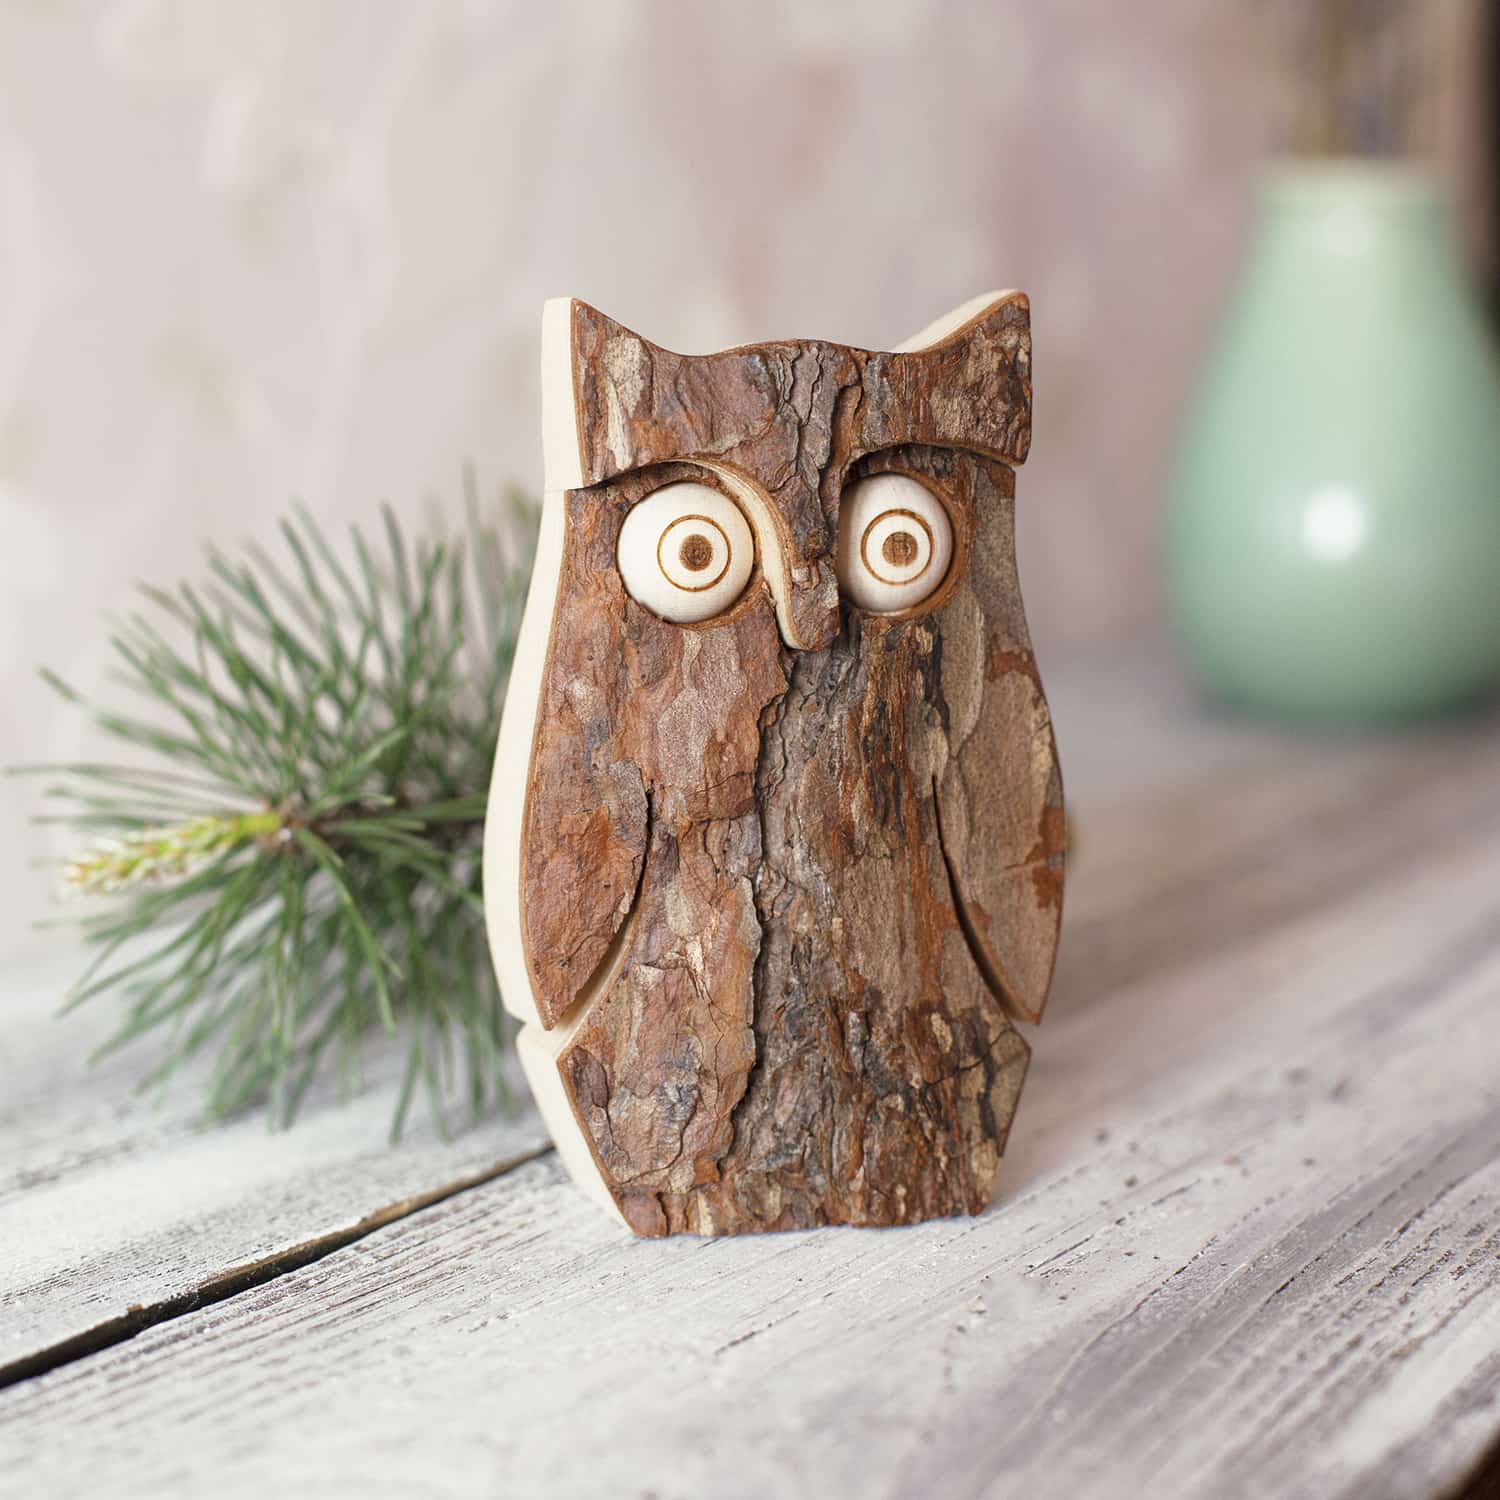 Decorative owl figurine made of wood with large eyes, standing on a wooden table next to a pine branch and a green vase.